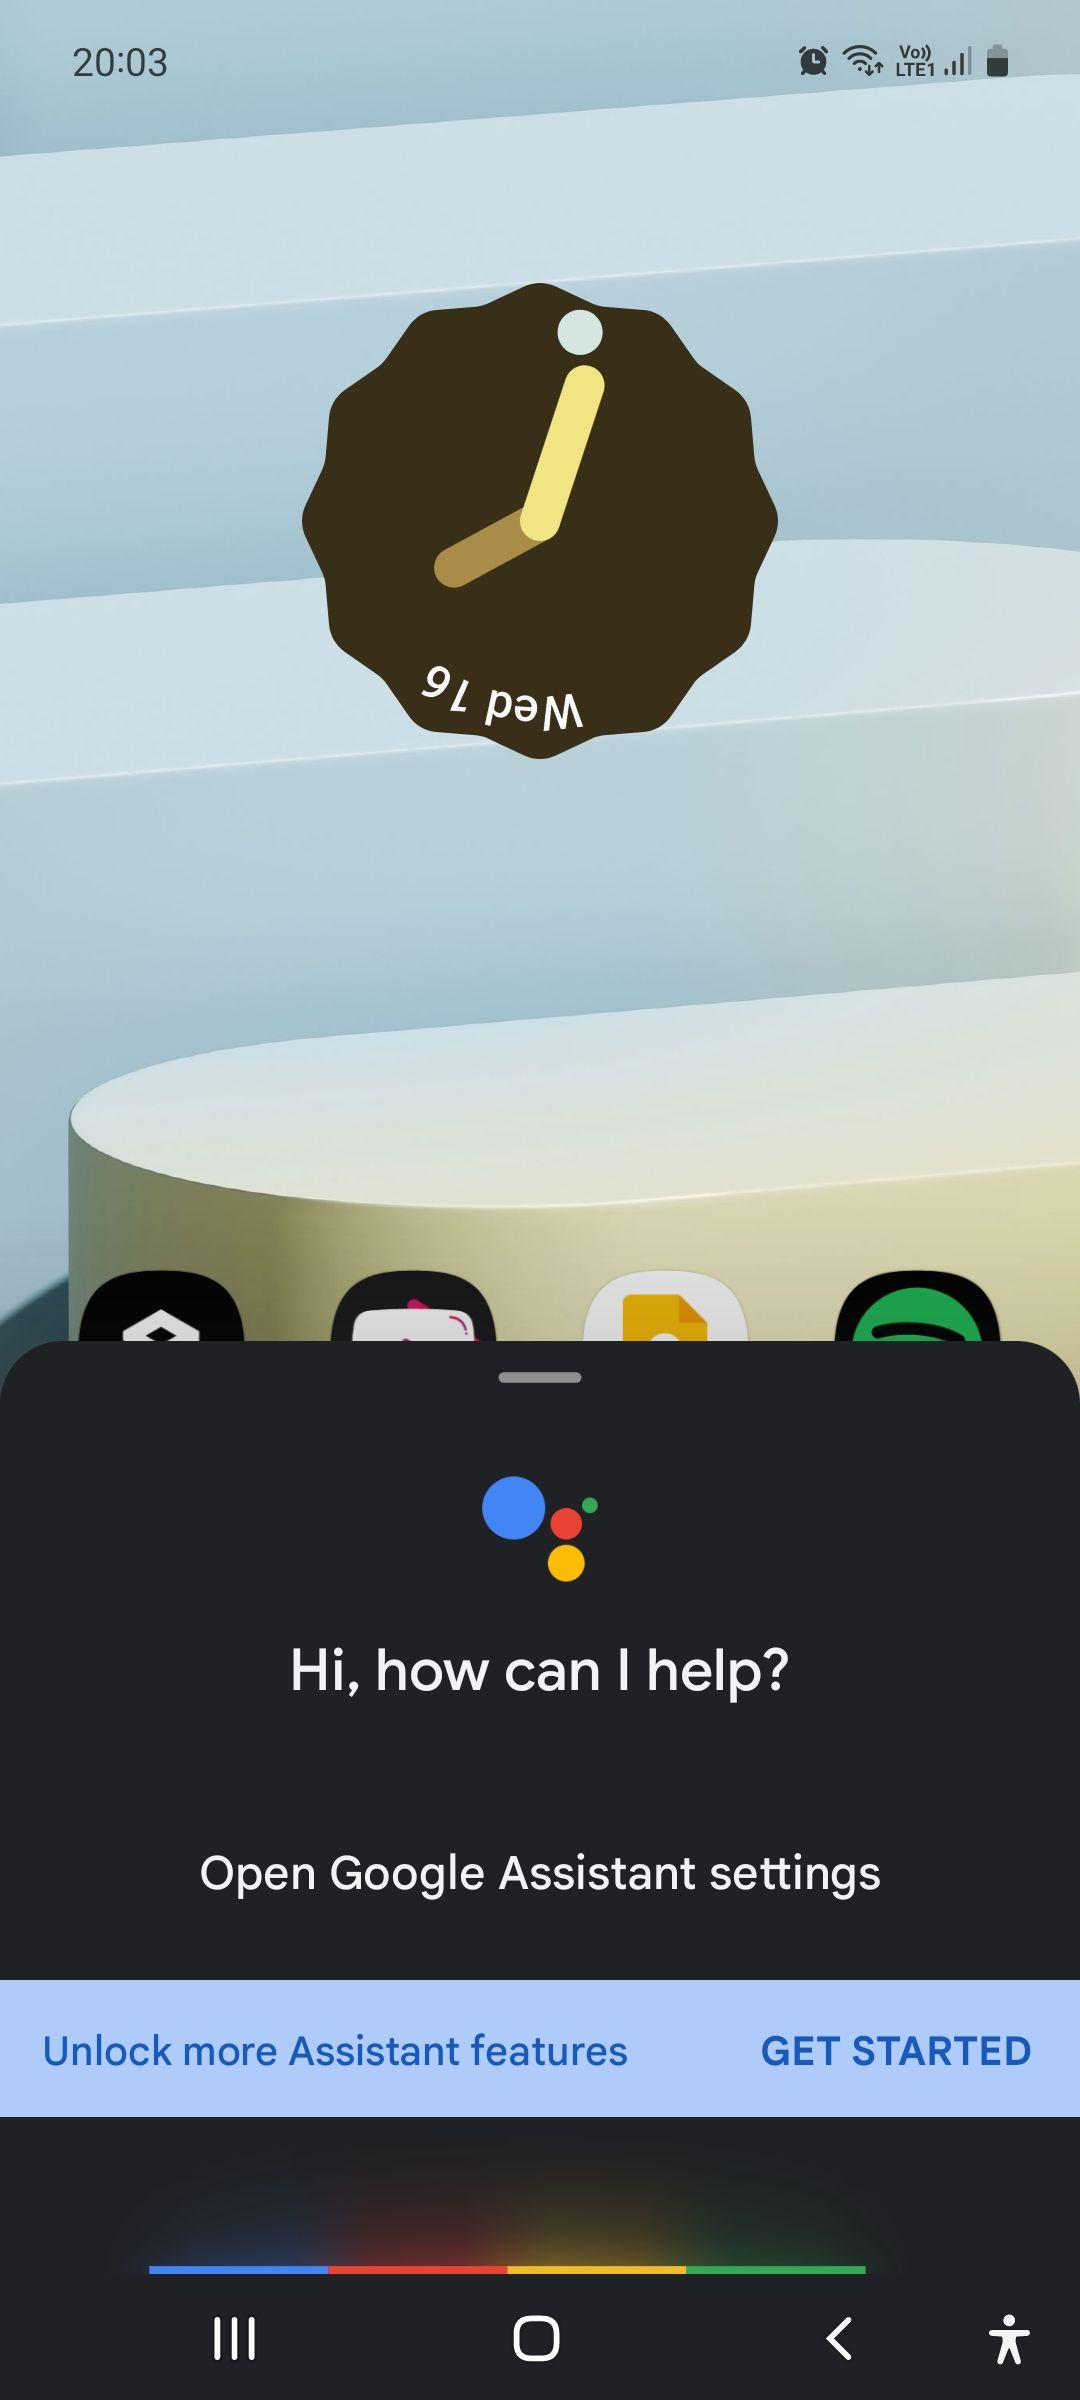 3 tips to personalize your Google Assistant